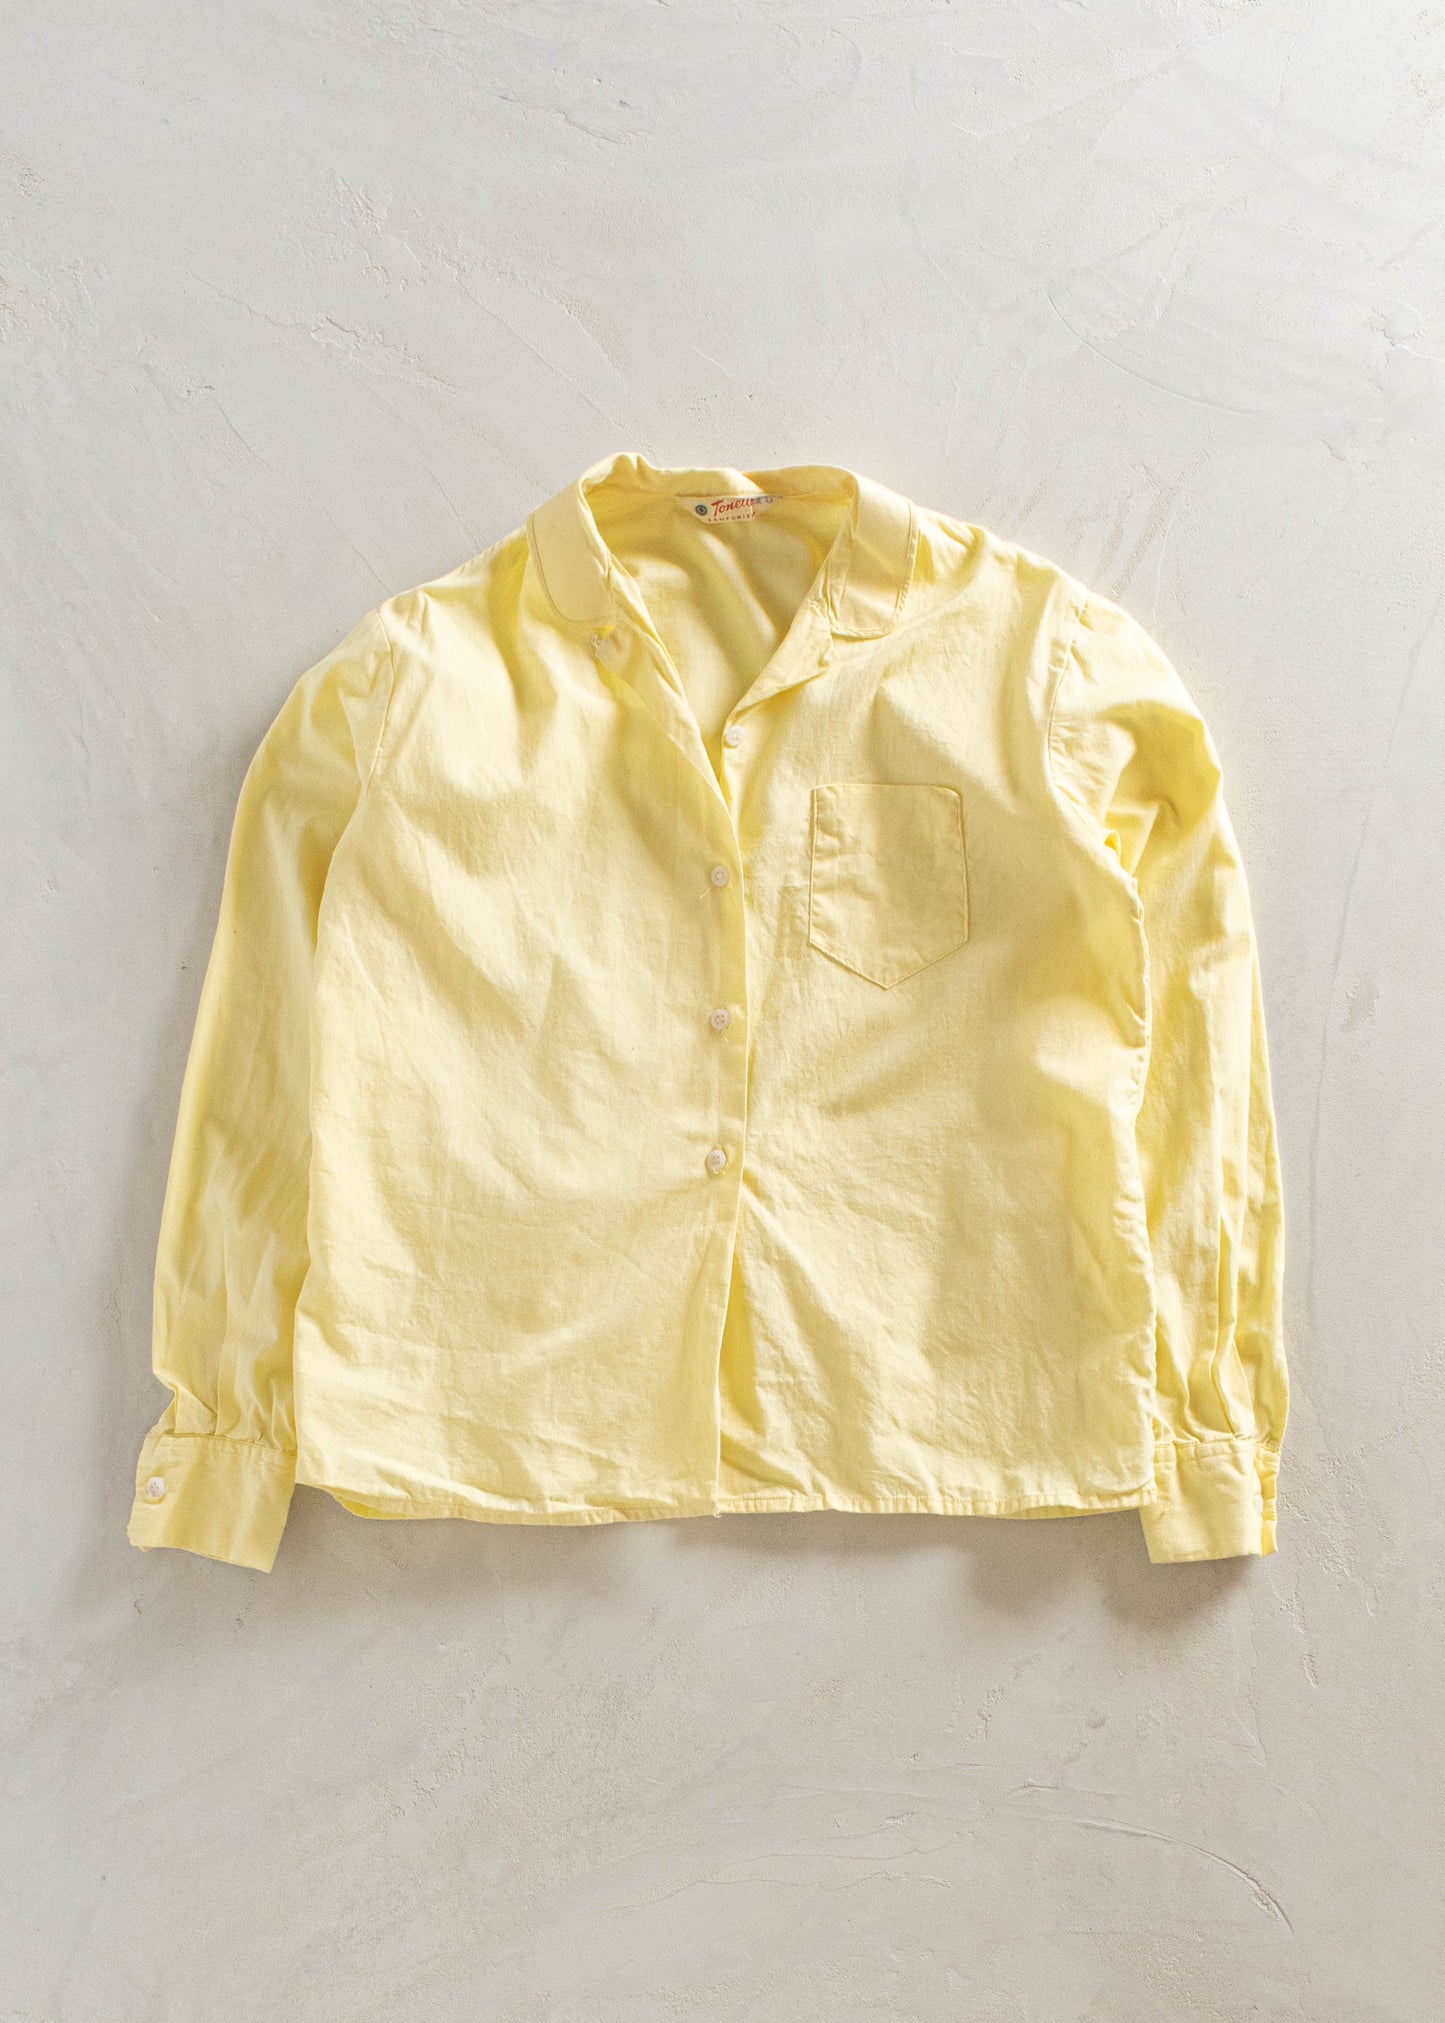 1960s Tonette Solid Yellow Long Sleeve Button Up Pajama Shirt Size XS/S